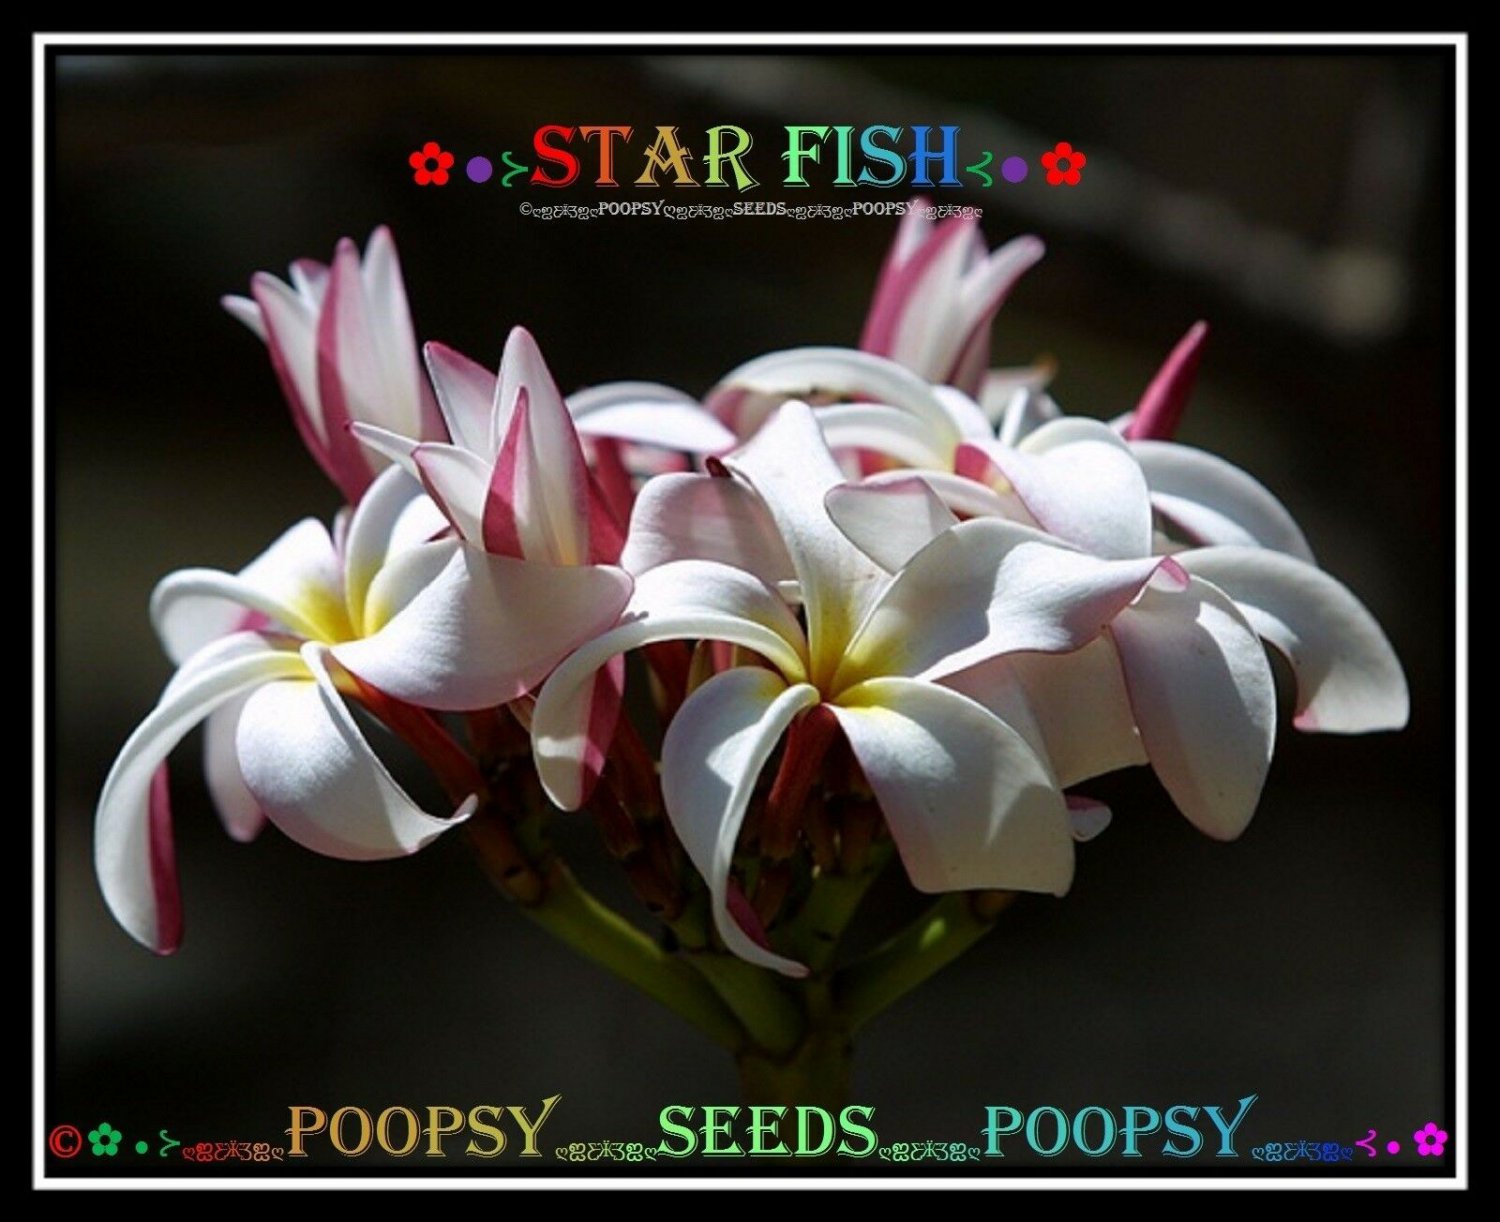 20 seed Star Fish or mix PLUMERIA FRANGIPANI P1 with tracking